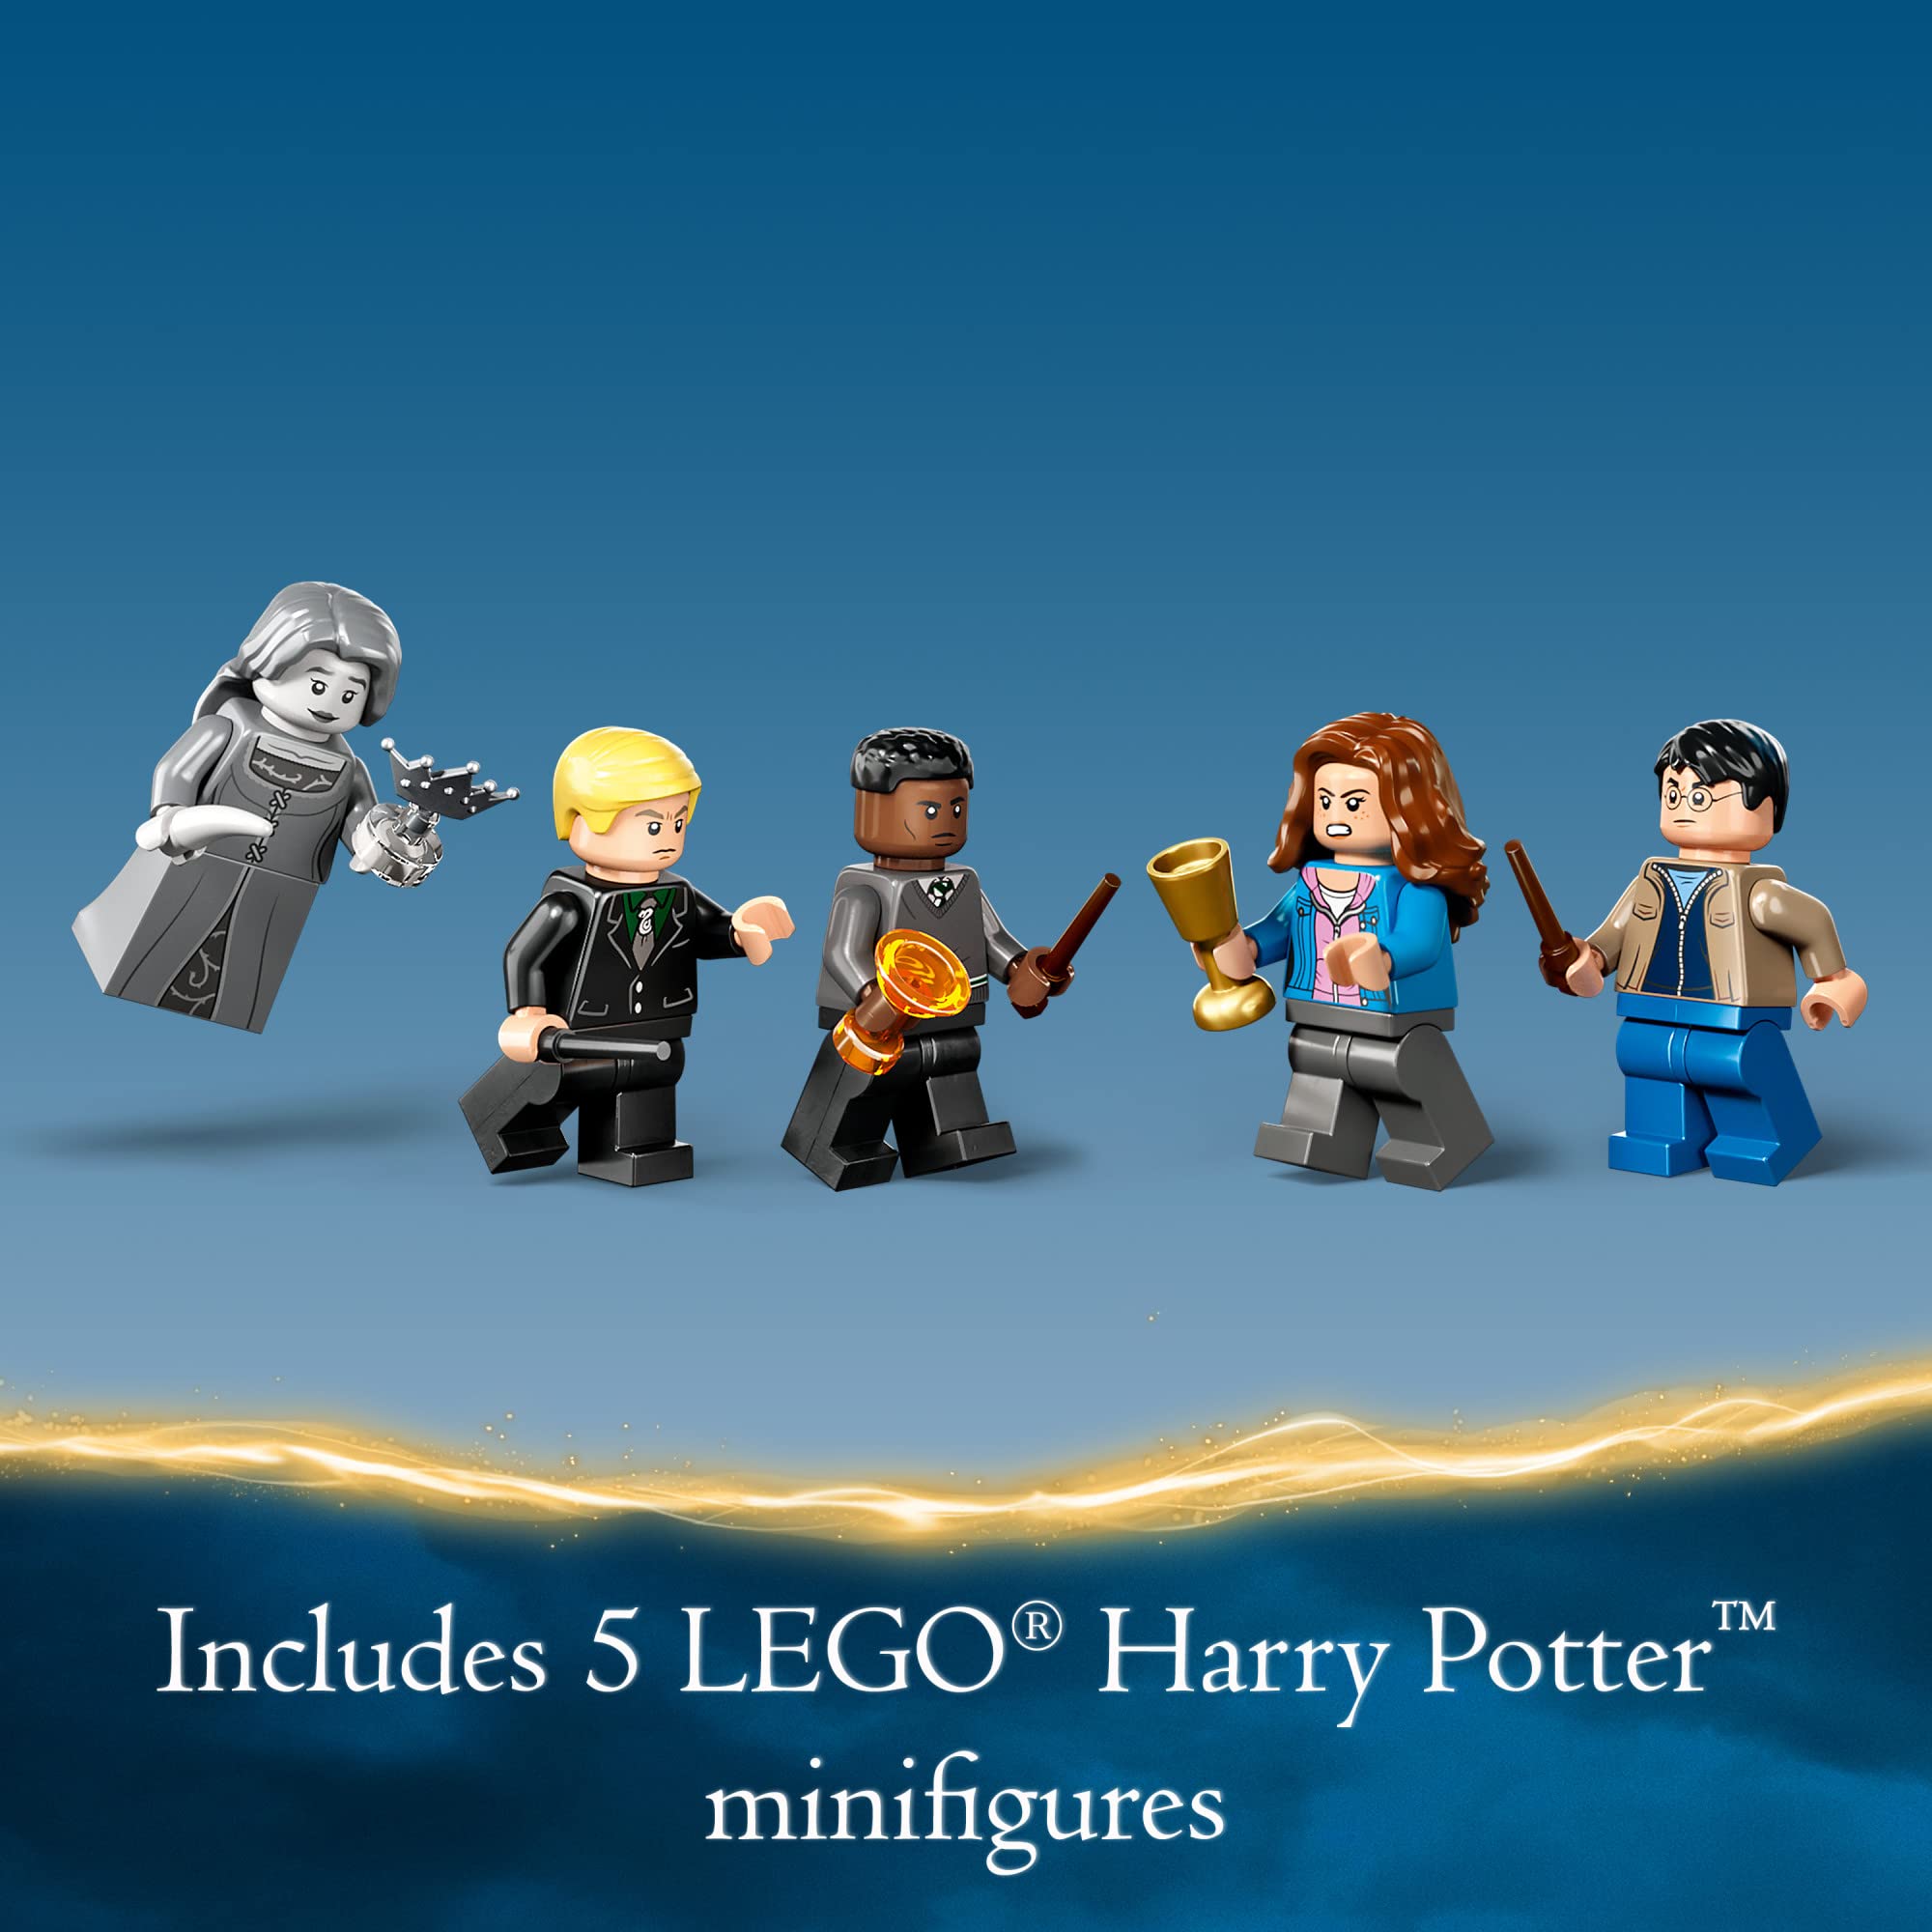 LEGO Harry Potter Hogwarts: Room of Requirement Building Set 76413 - Featuring Harry, Hermione, and Ron Minifigures, Wands, and Transforming Fire Serpent, Deathly Hallows Movie Inspired Castle Toy